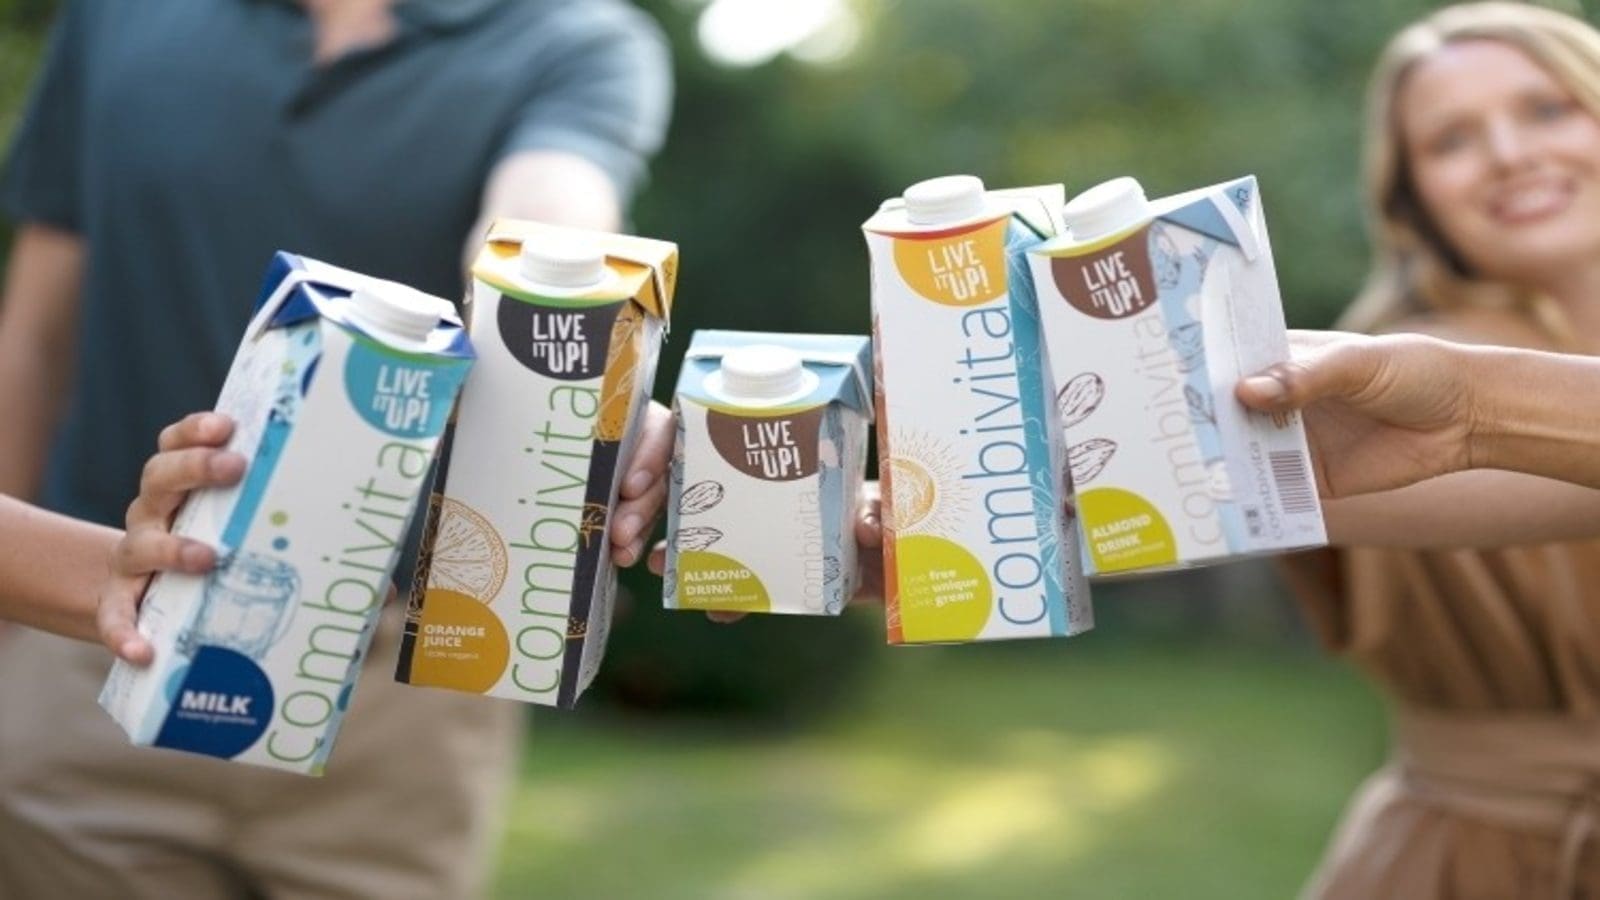 SIG to acquire Evergreen’s fresh carton business in Asia Pacific for $335m